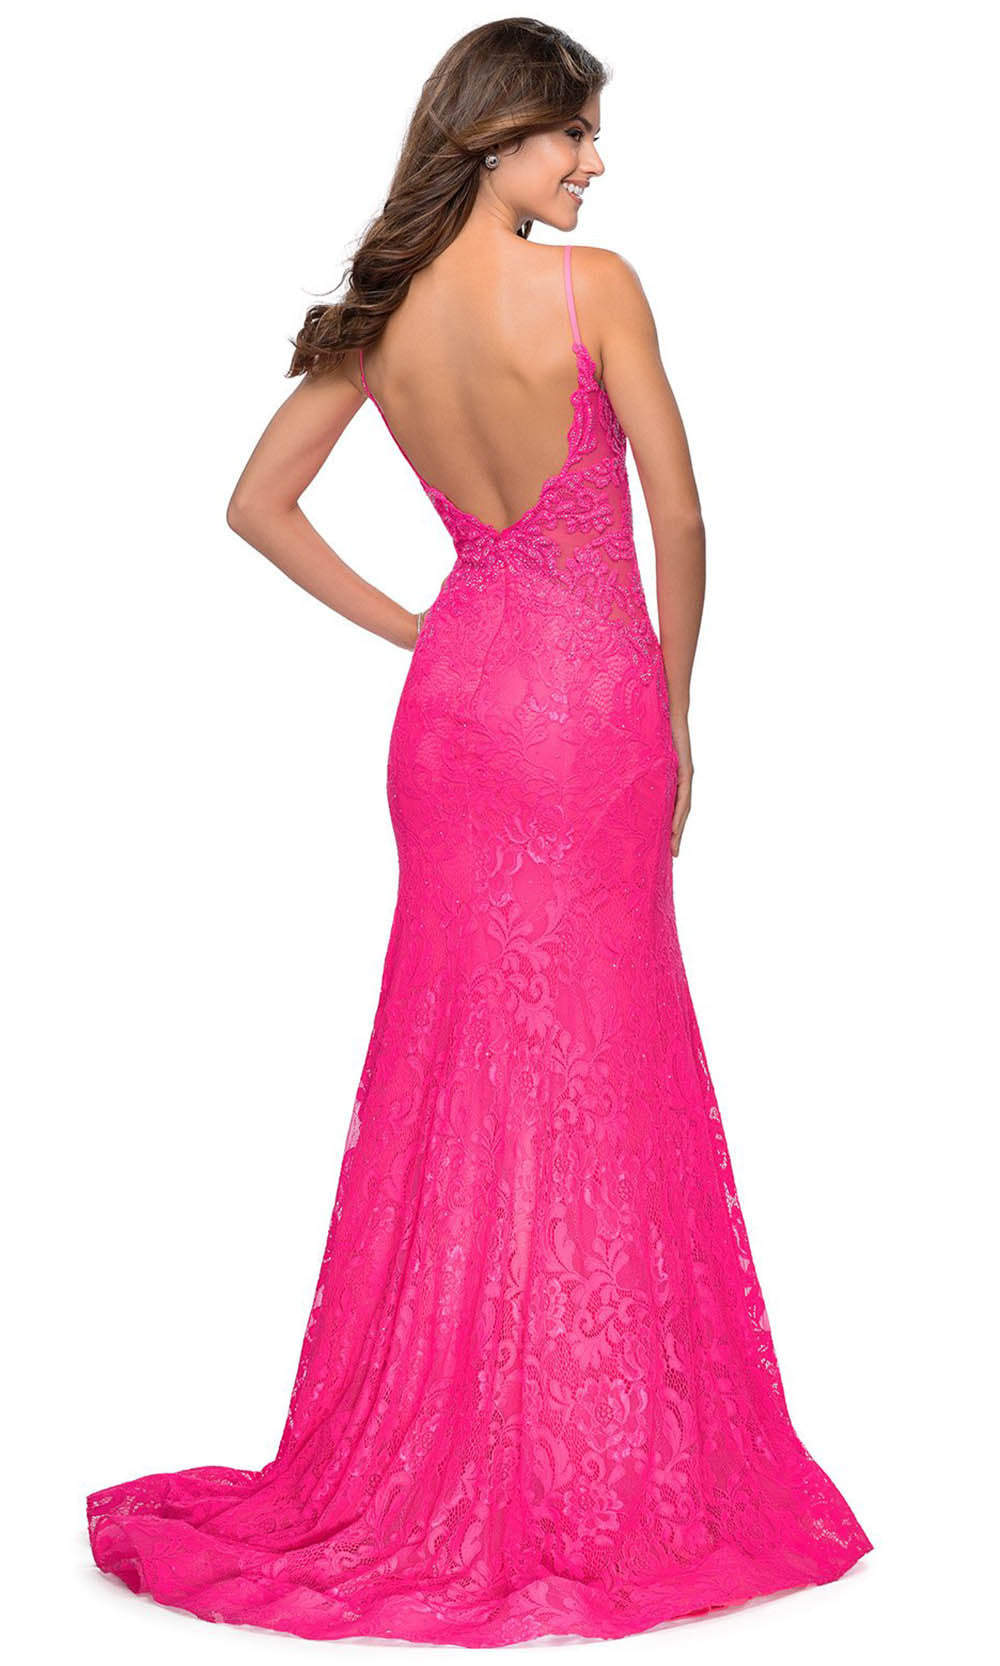 La Femme - 28355 Sparkly Lace Illusion Bodice Mermaid Gown In Pink